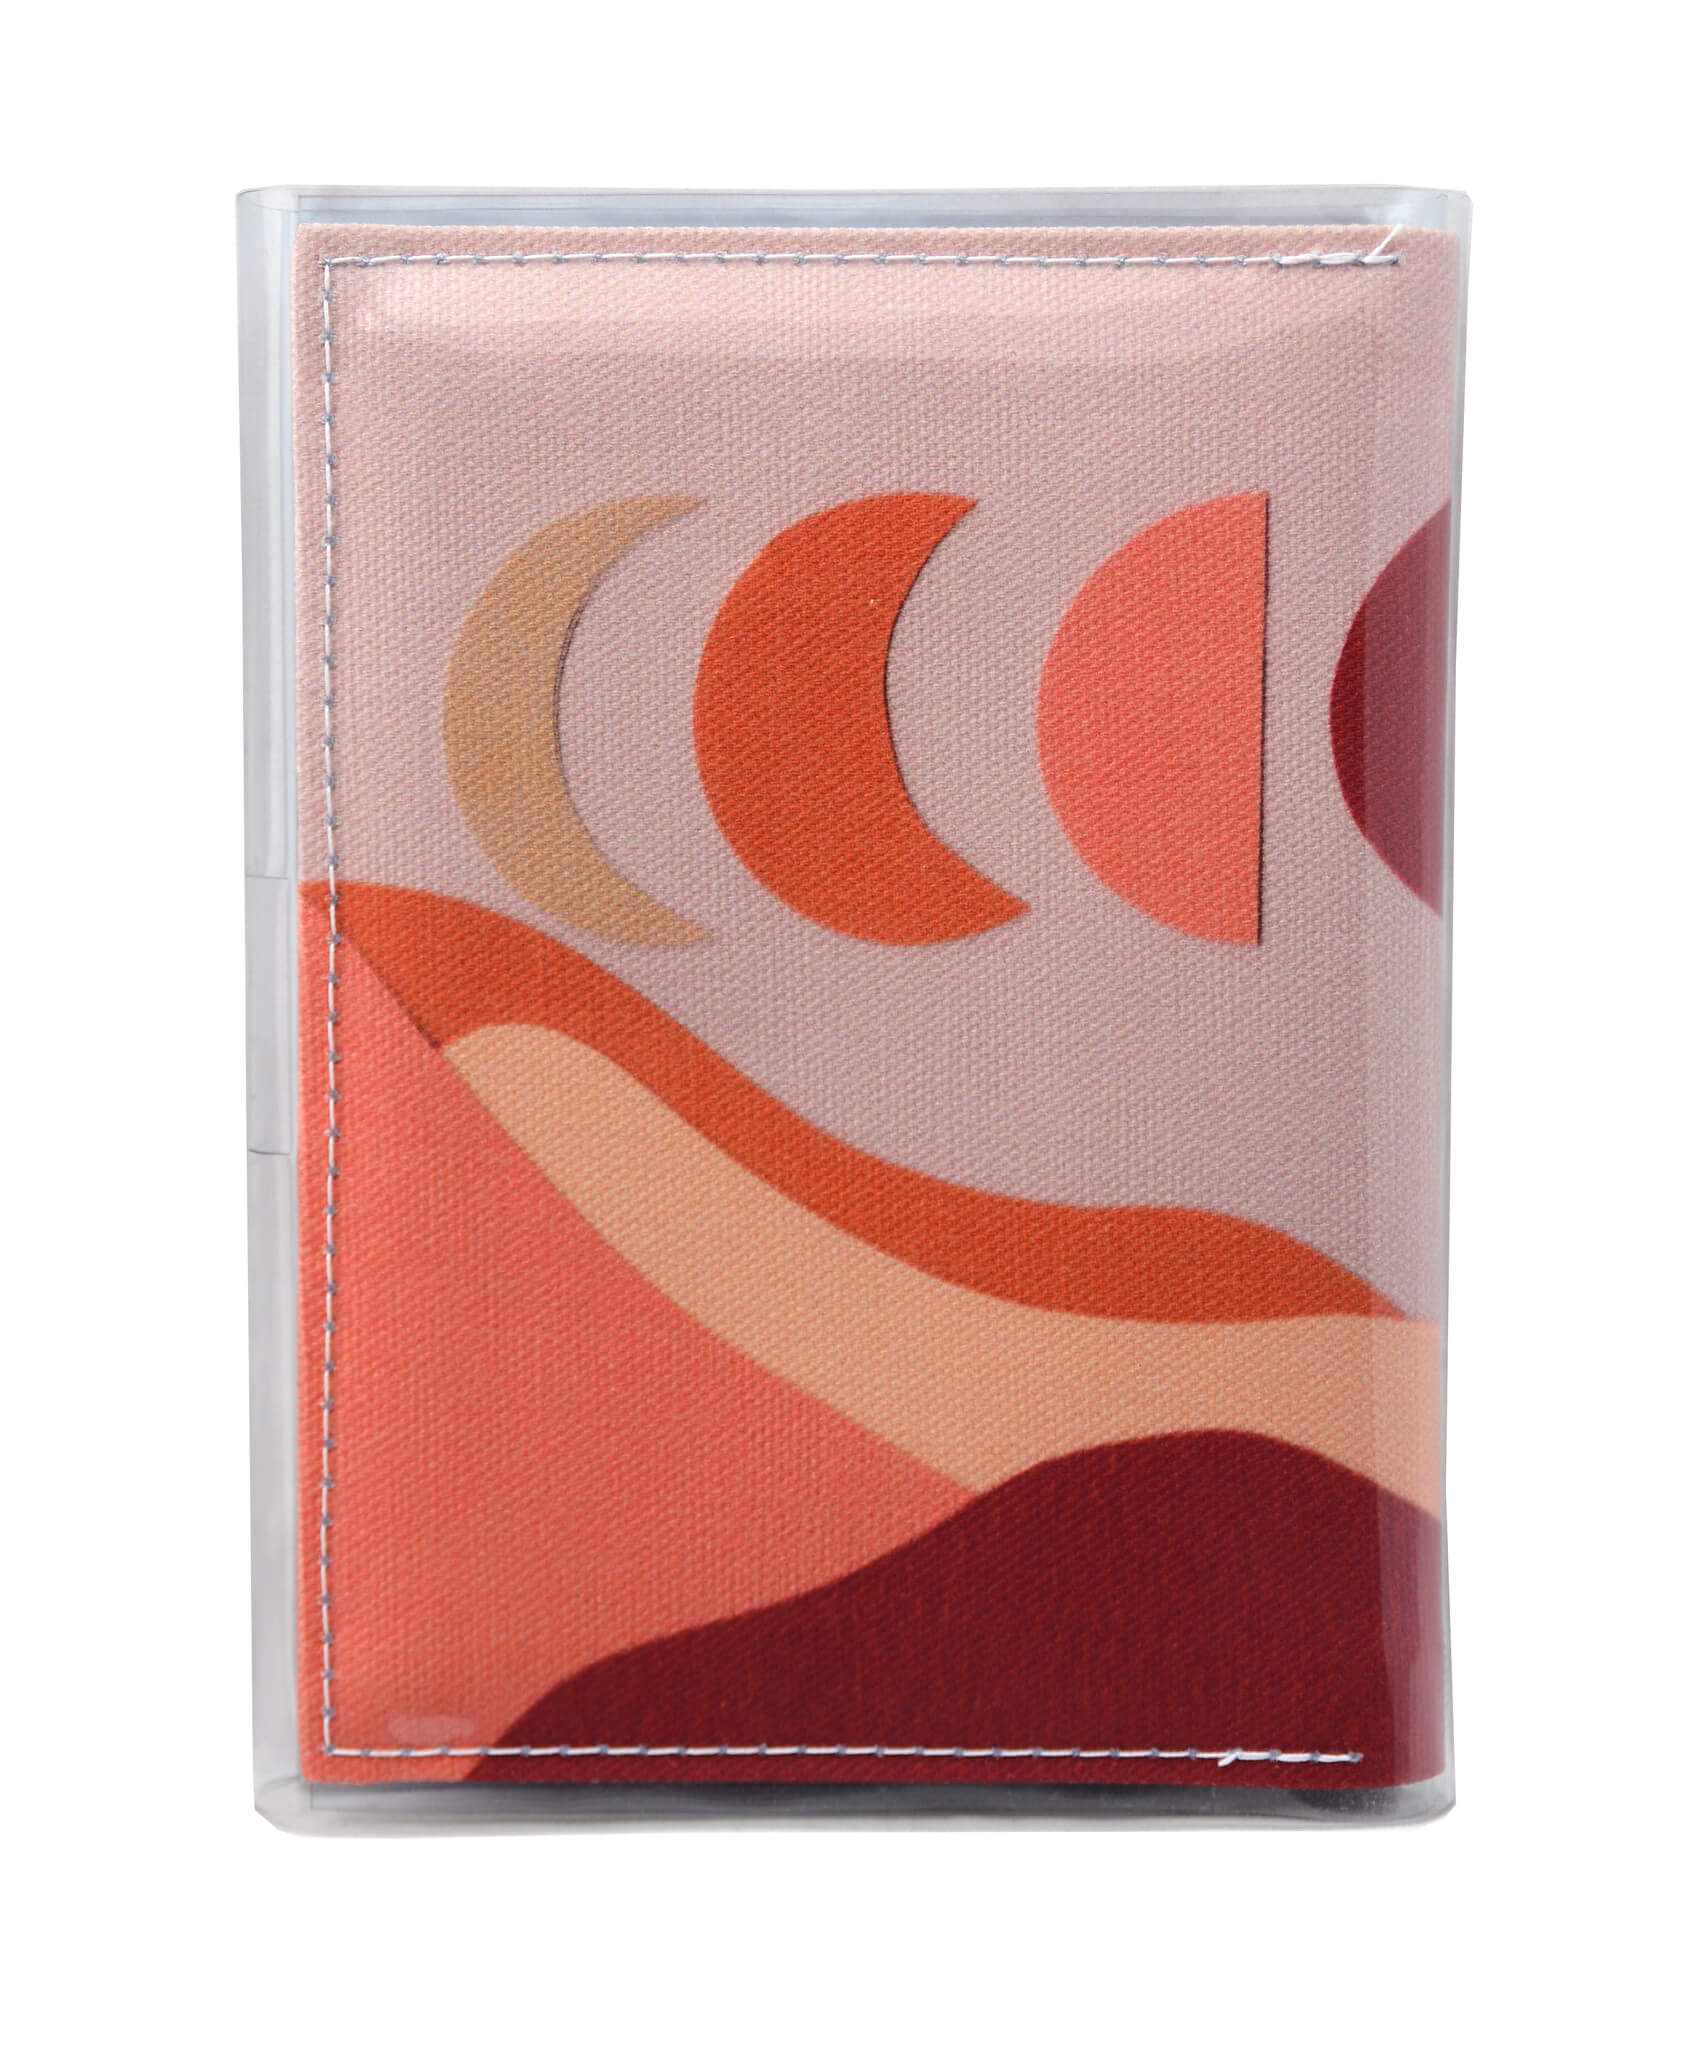 This is an image of the rear of a Kitty Came Home A6 journal in the 'Moonshadow drive’ design by Satin and Tat. The moon appears in all its phases in a dusty pink sky above a landscape lit by the moon's colours: burgundy, oranges, and apricot.